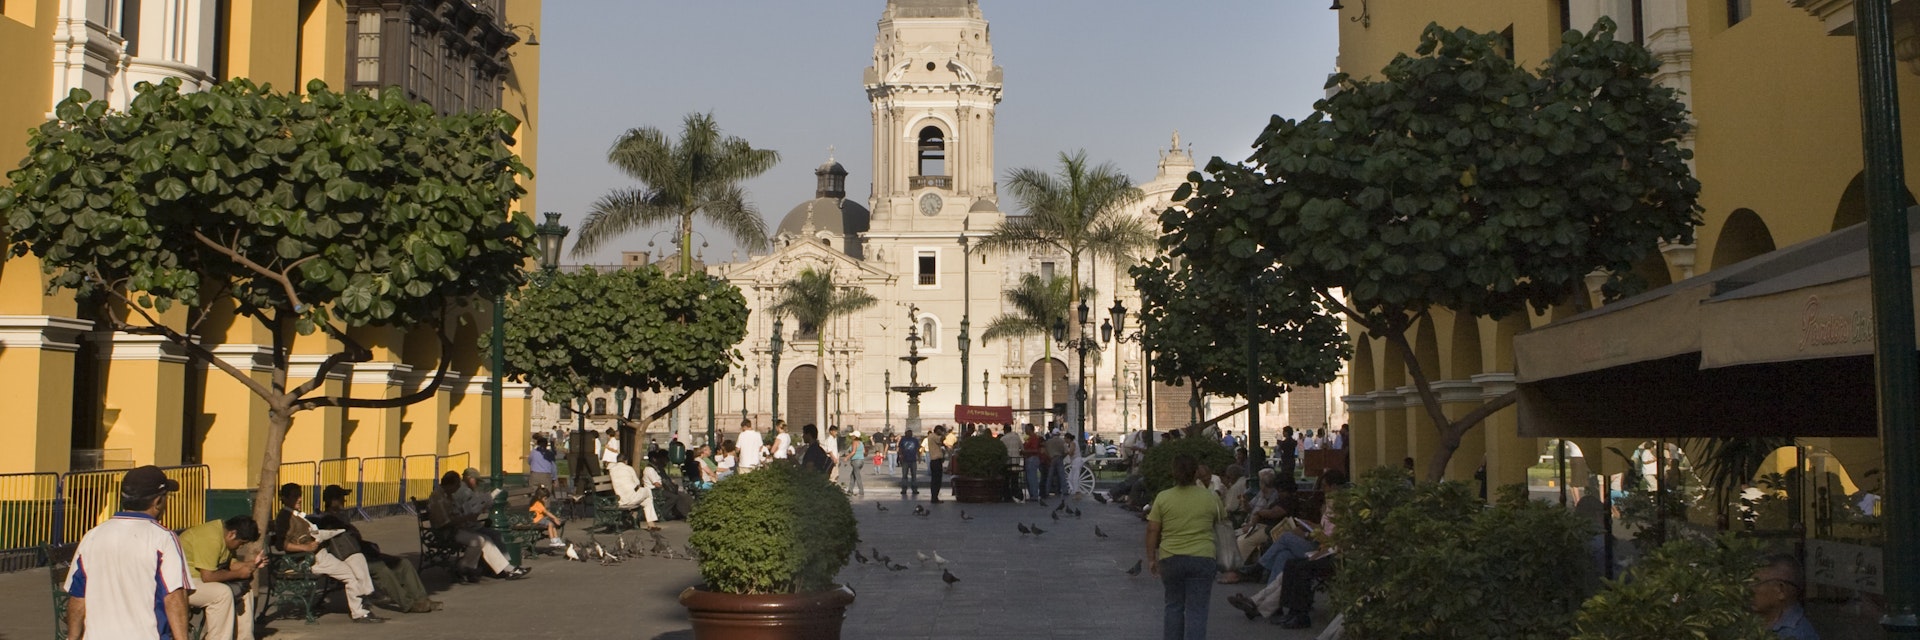 People walk down the colorful Pasaje Santa Rosa in Lima, Peru with the Municipal Palace and art gallery on the left, a restaurant on the right and the Plaza de Armas and Cathedral of Lima in the distance.
905328568